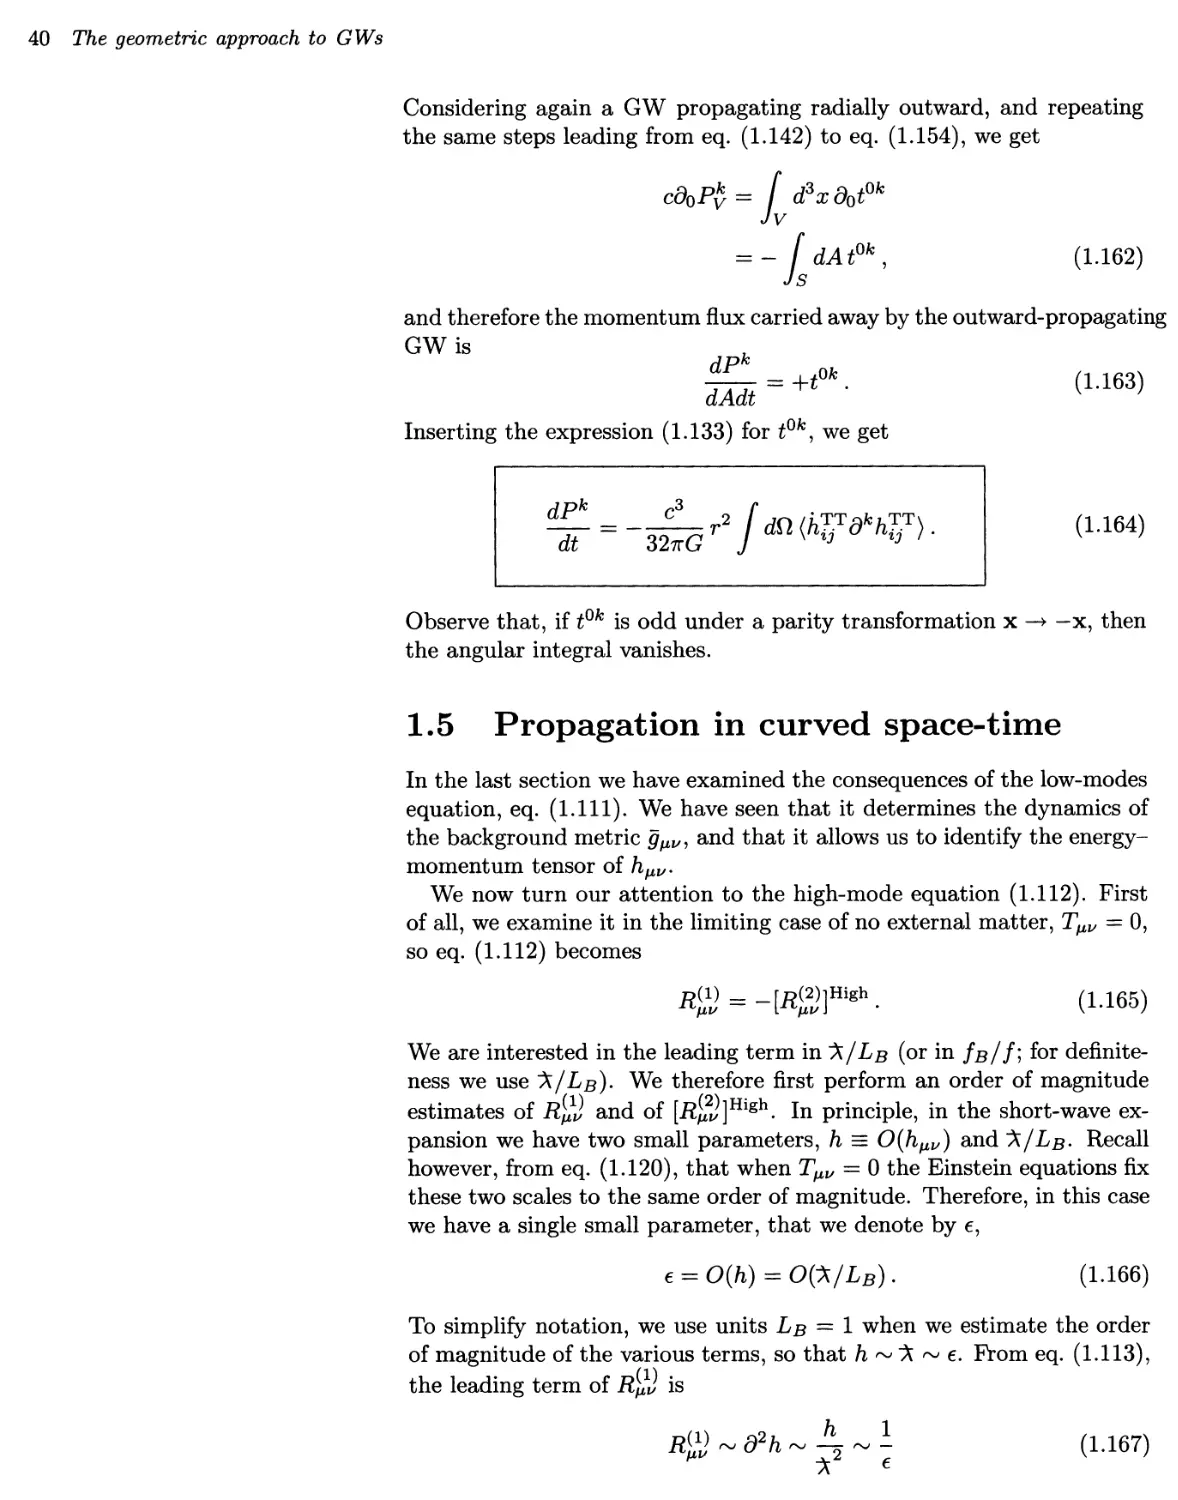 1.5 Propagation in curved space-time 40